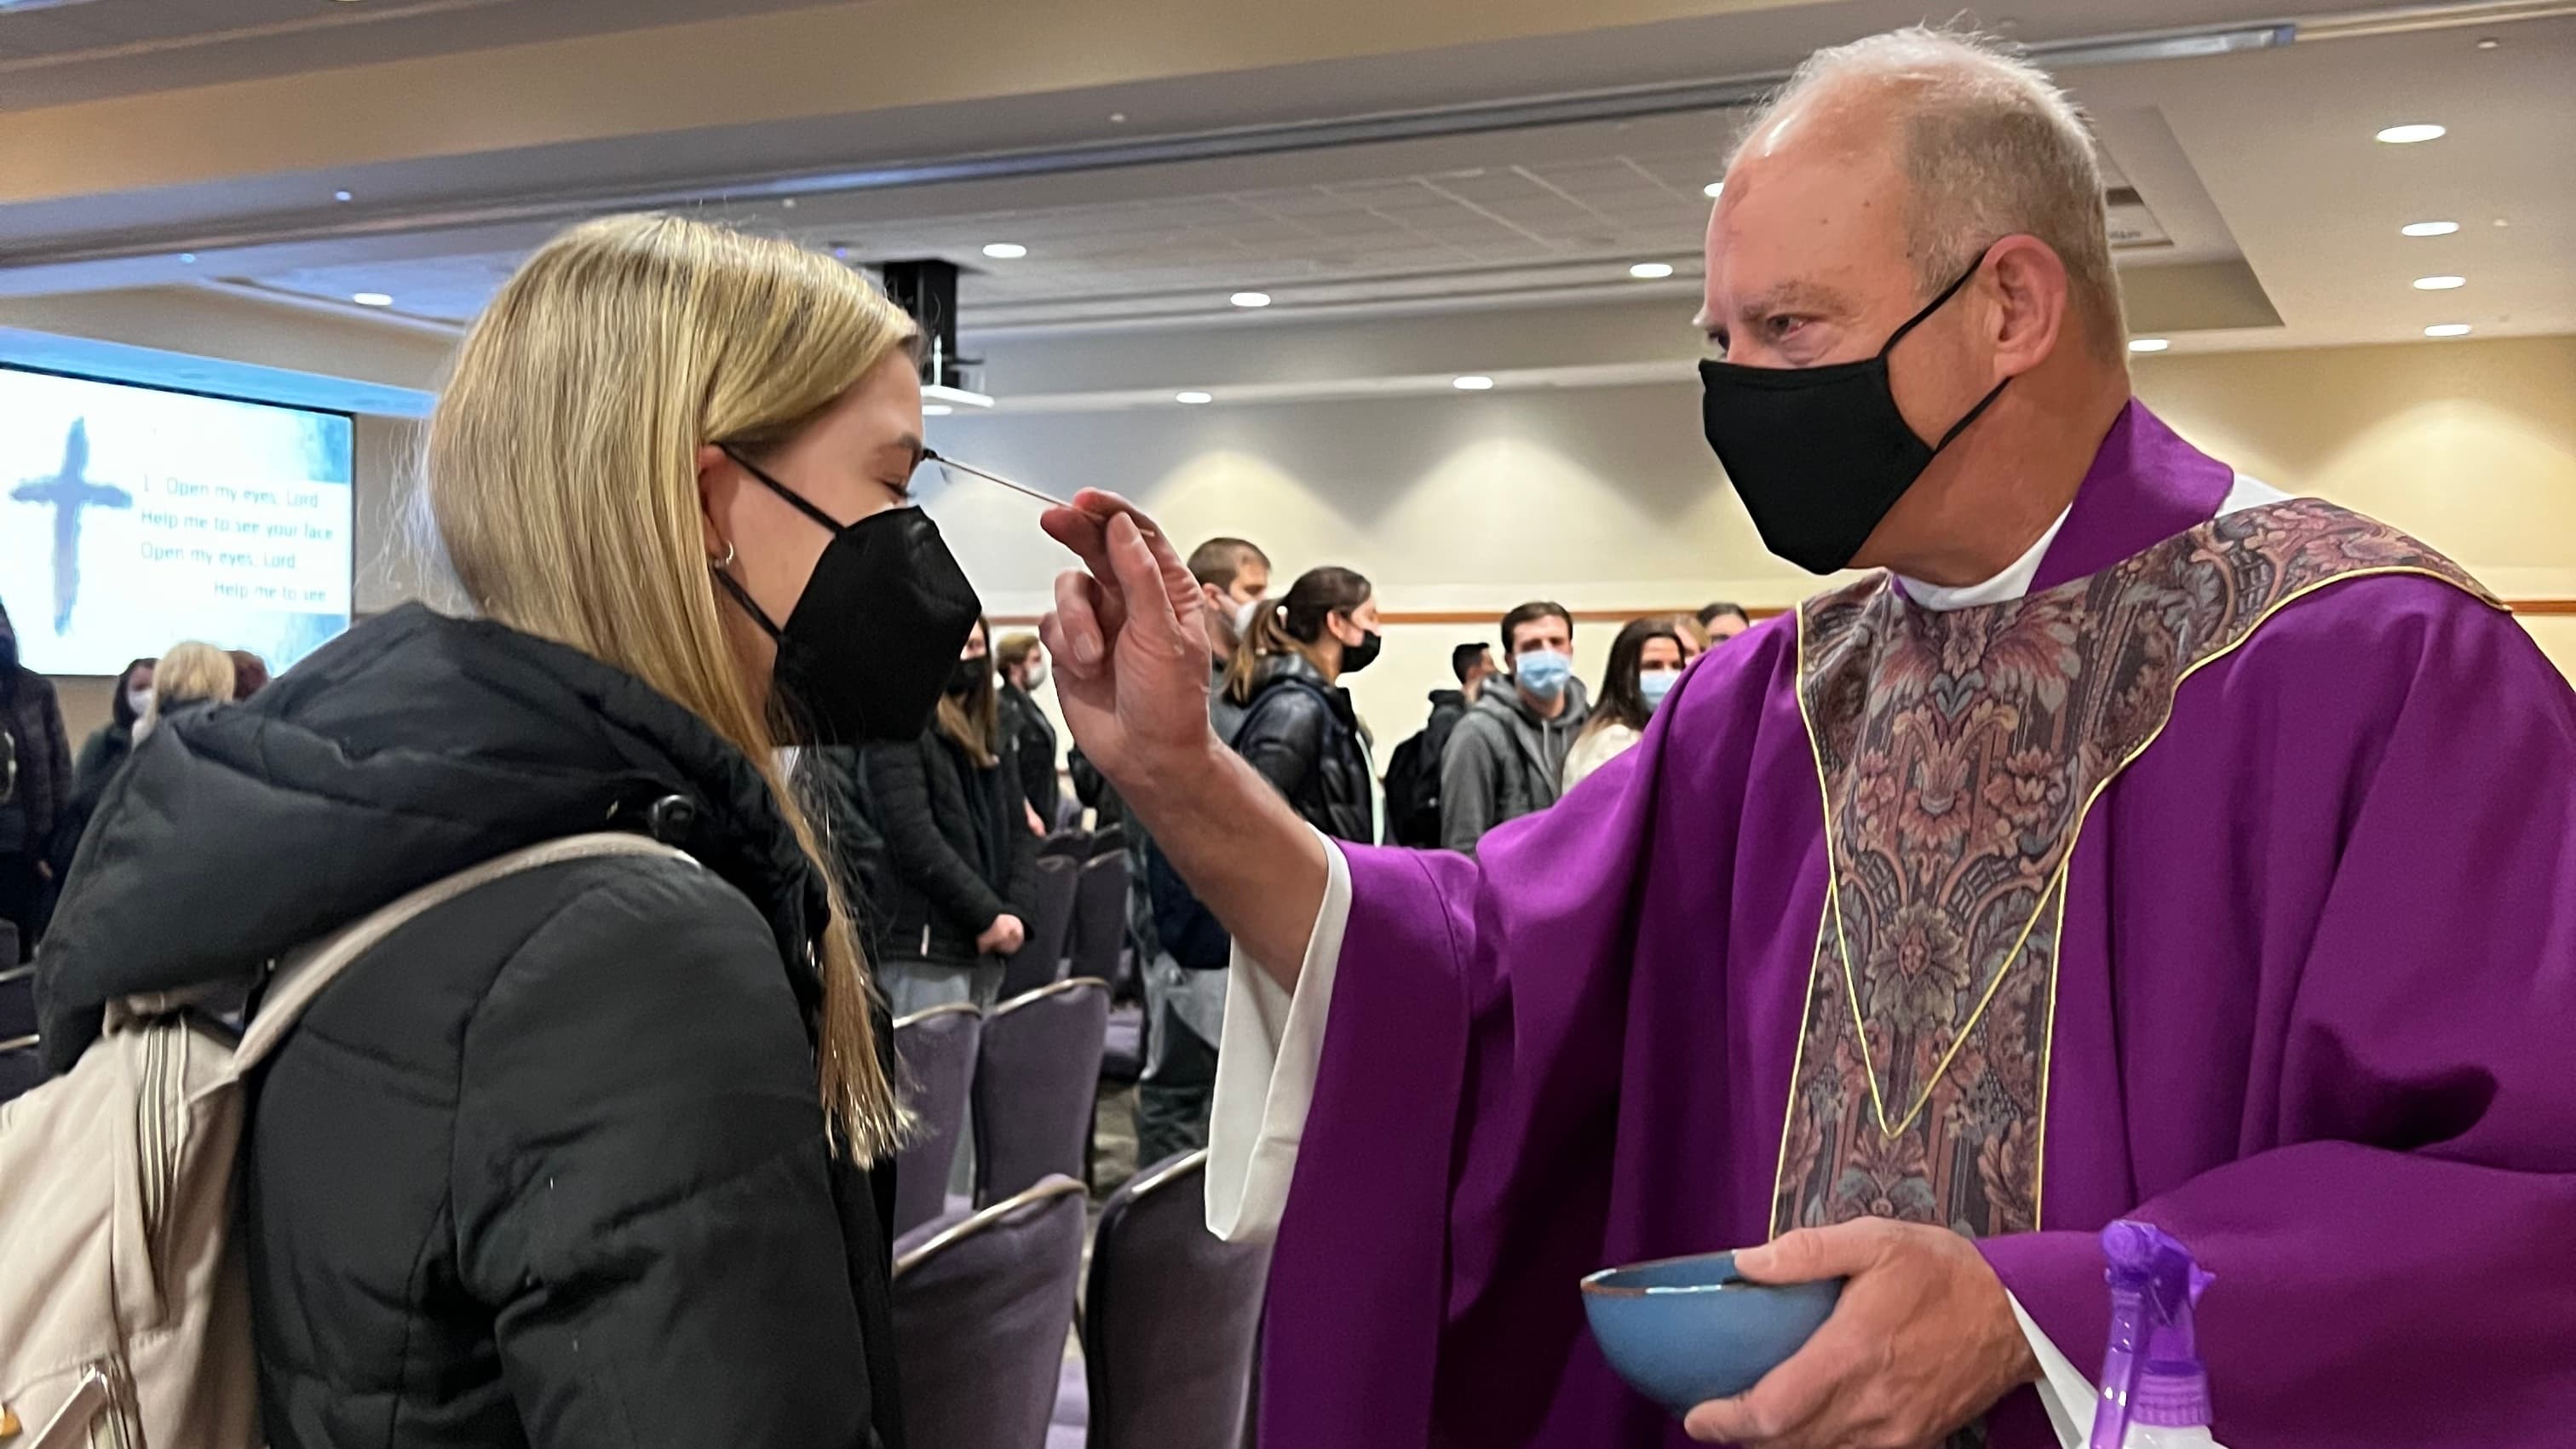 Rev. Daniel Sweeney, S.J., Ph.D., assistant professor of Political Science at the University, administers ashes at a 2022 Ash Wednesday Mass.